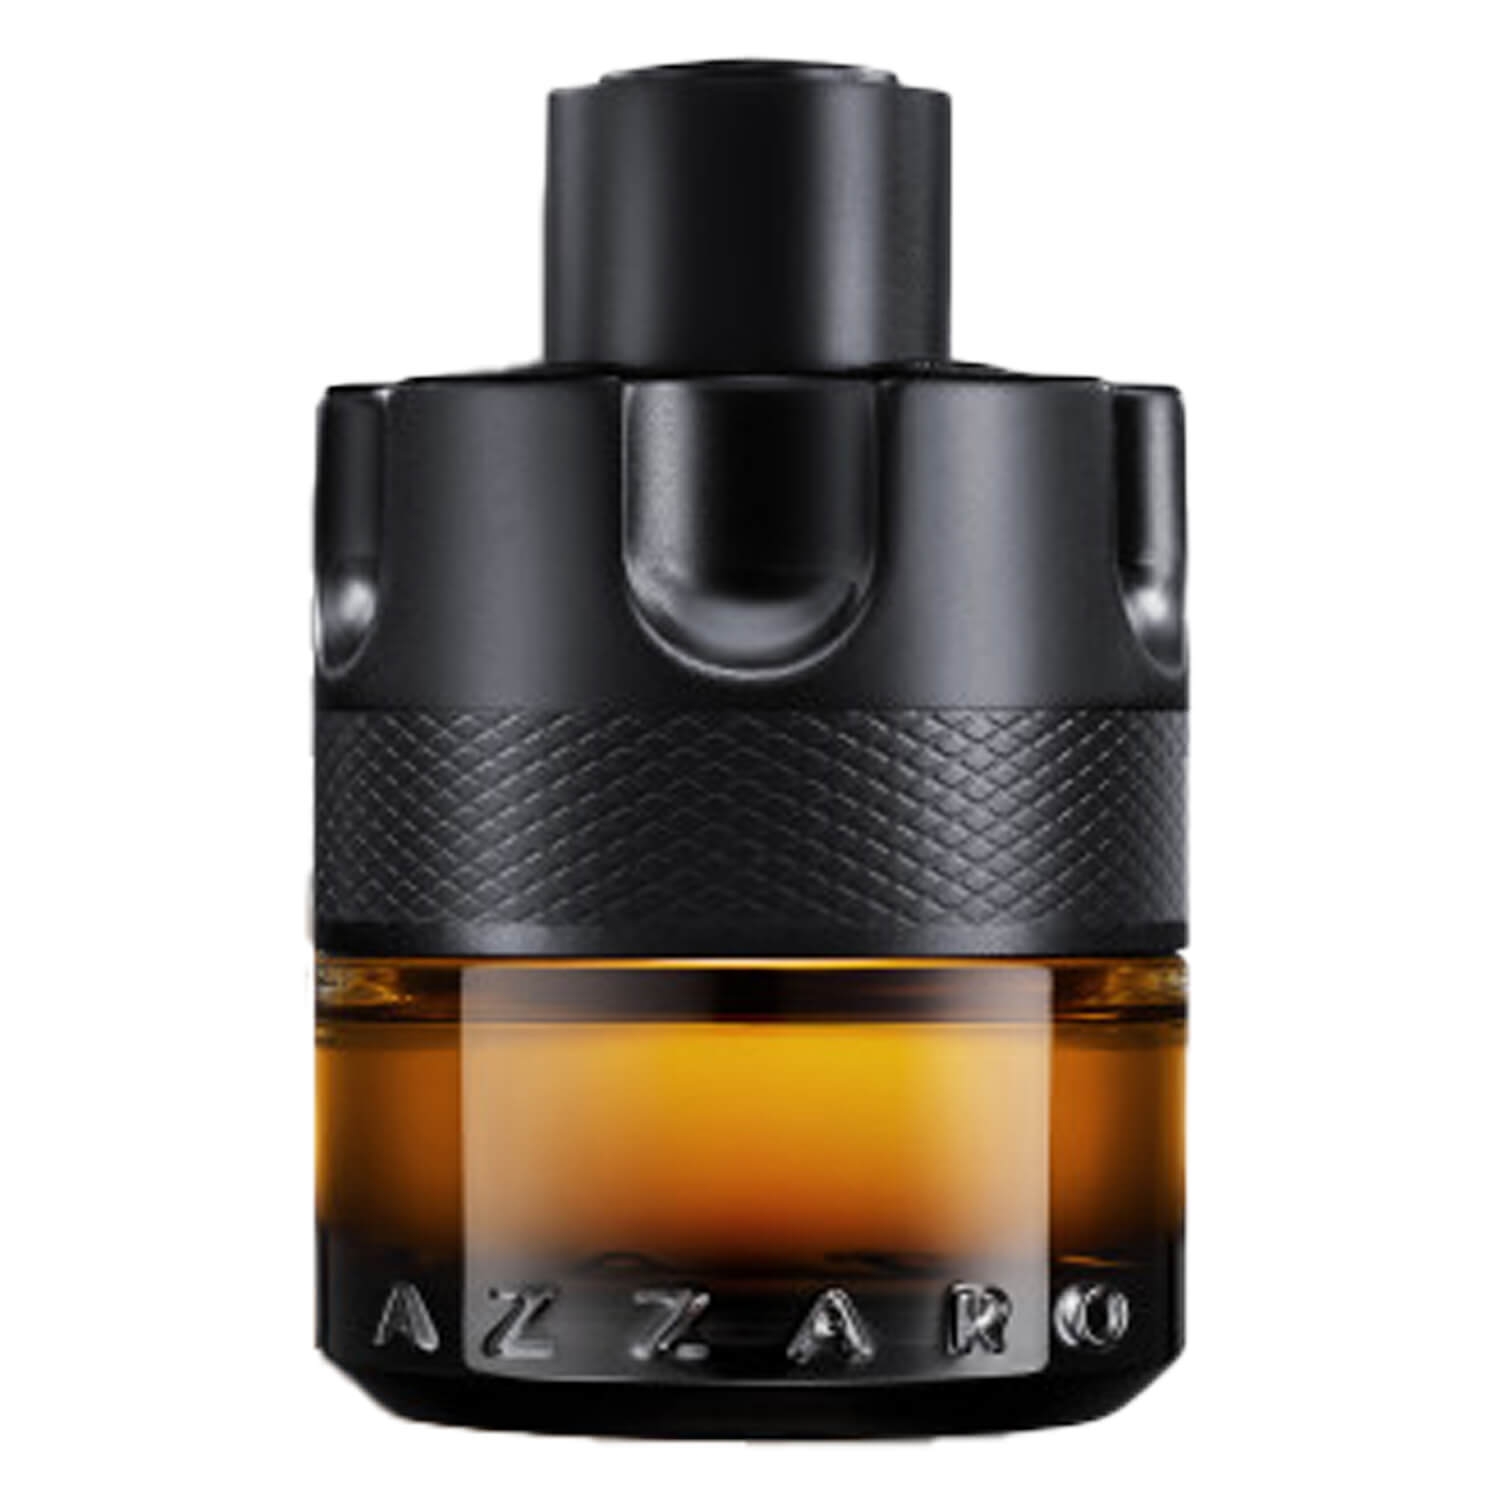 Produktbild von Azzaro Wanted - The Most Wanted Le Parfum